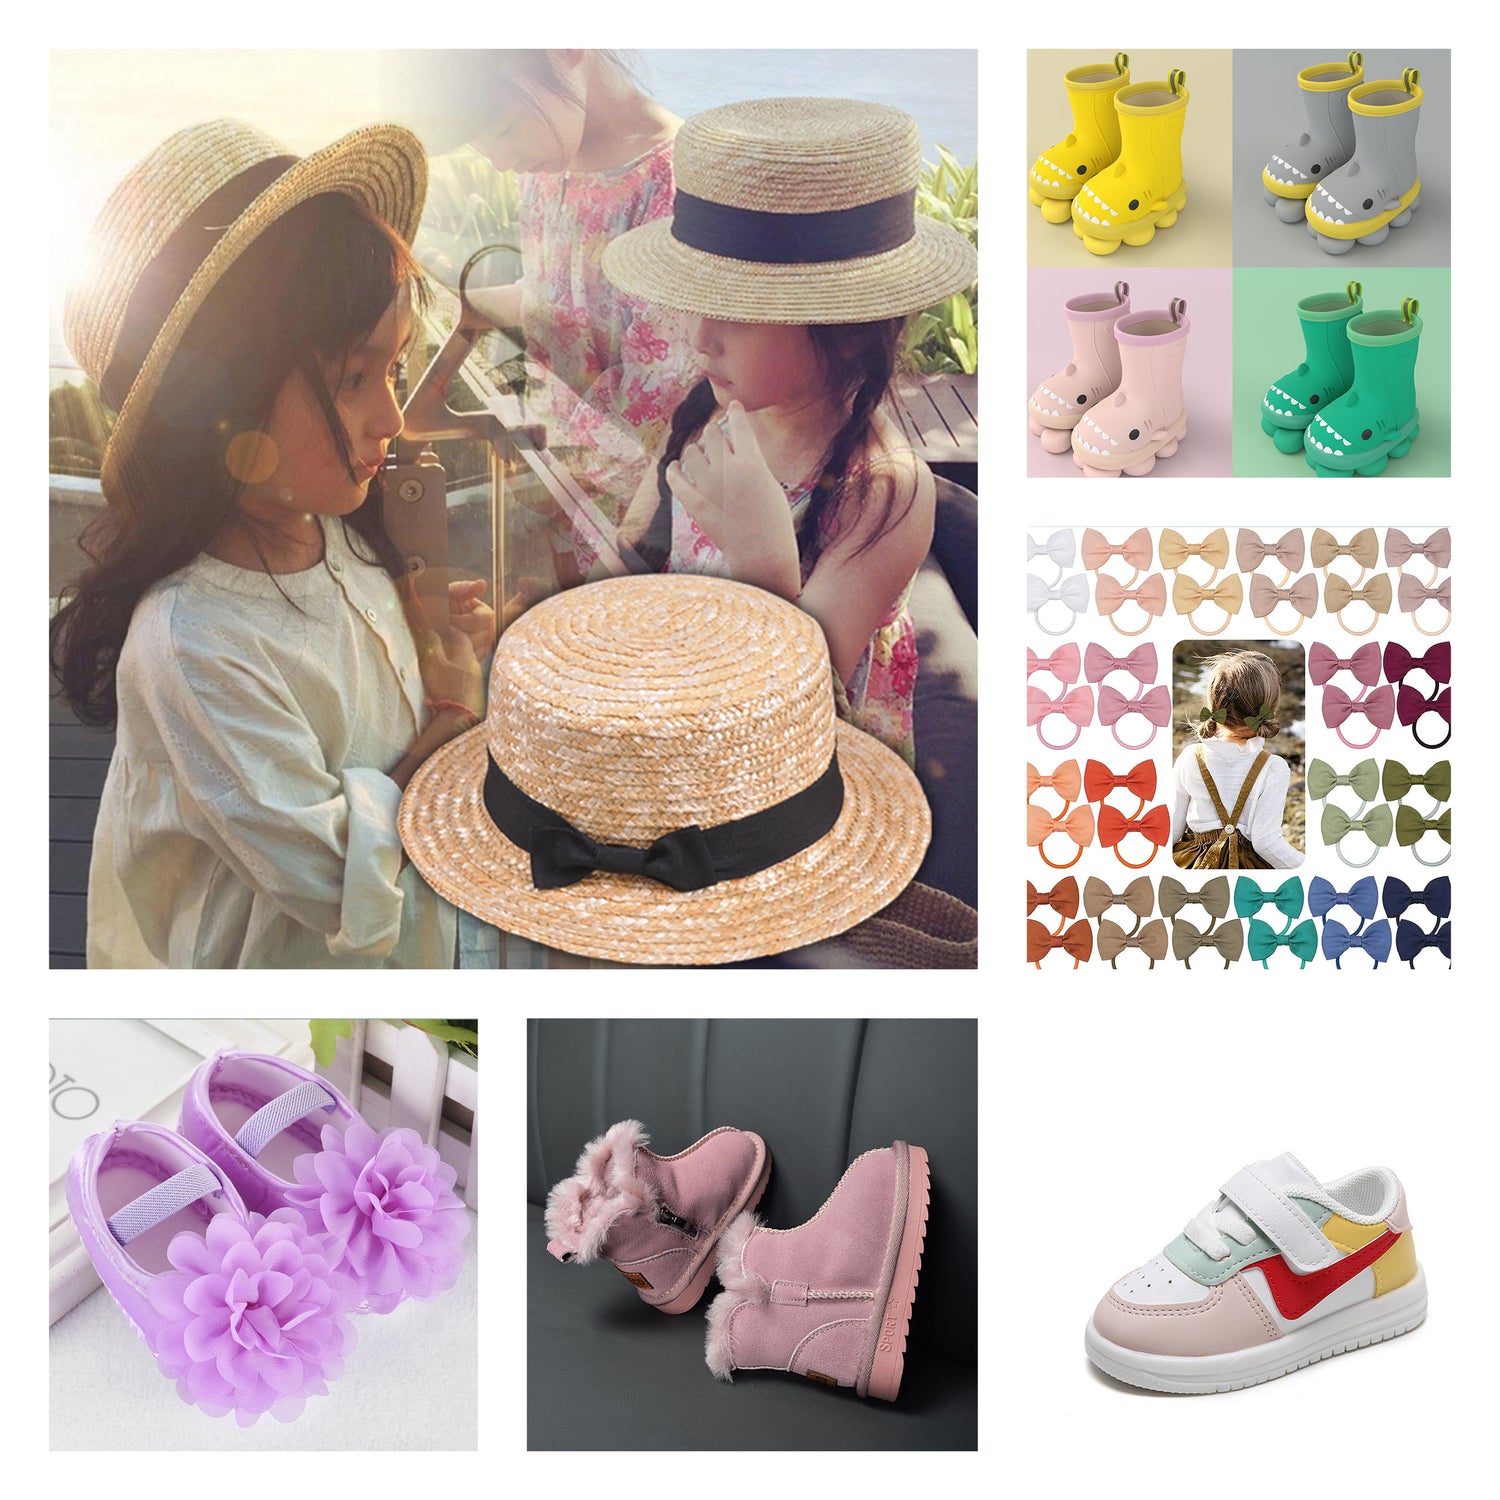 Girl Shoes, Bows, Hats, and Accessories! Infant, Baby, Toddler, and Older